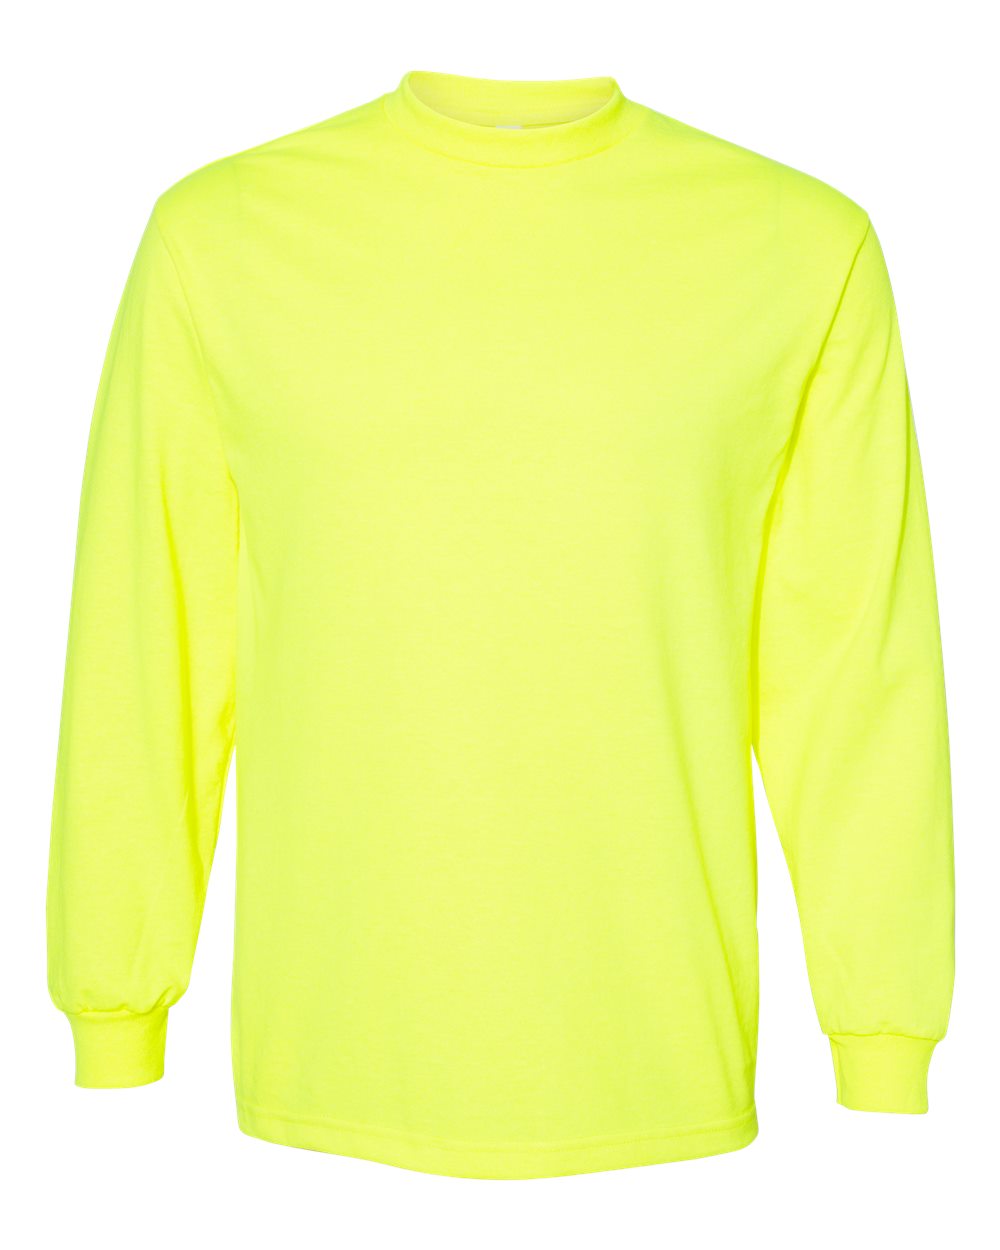 American Apparel Unisex Heavyweight Cotton Long Sleeve Tee 1304 #color_Safety Green